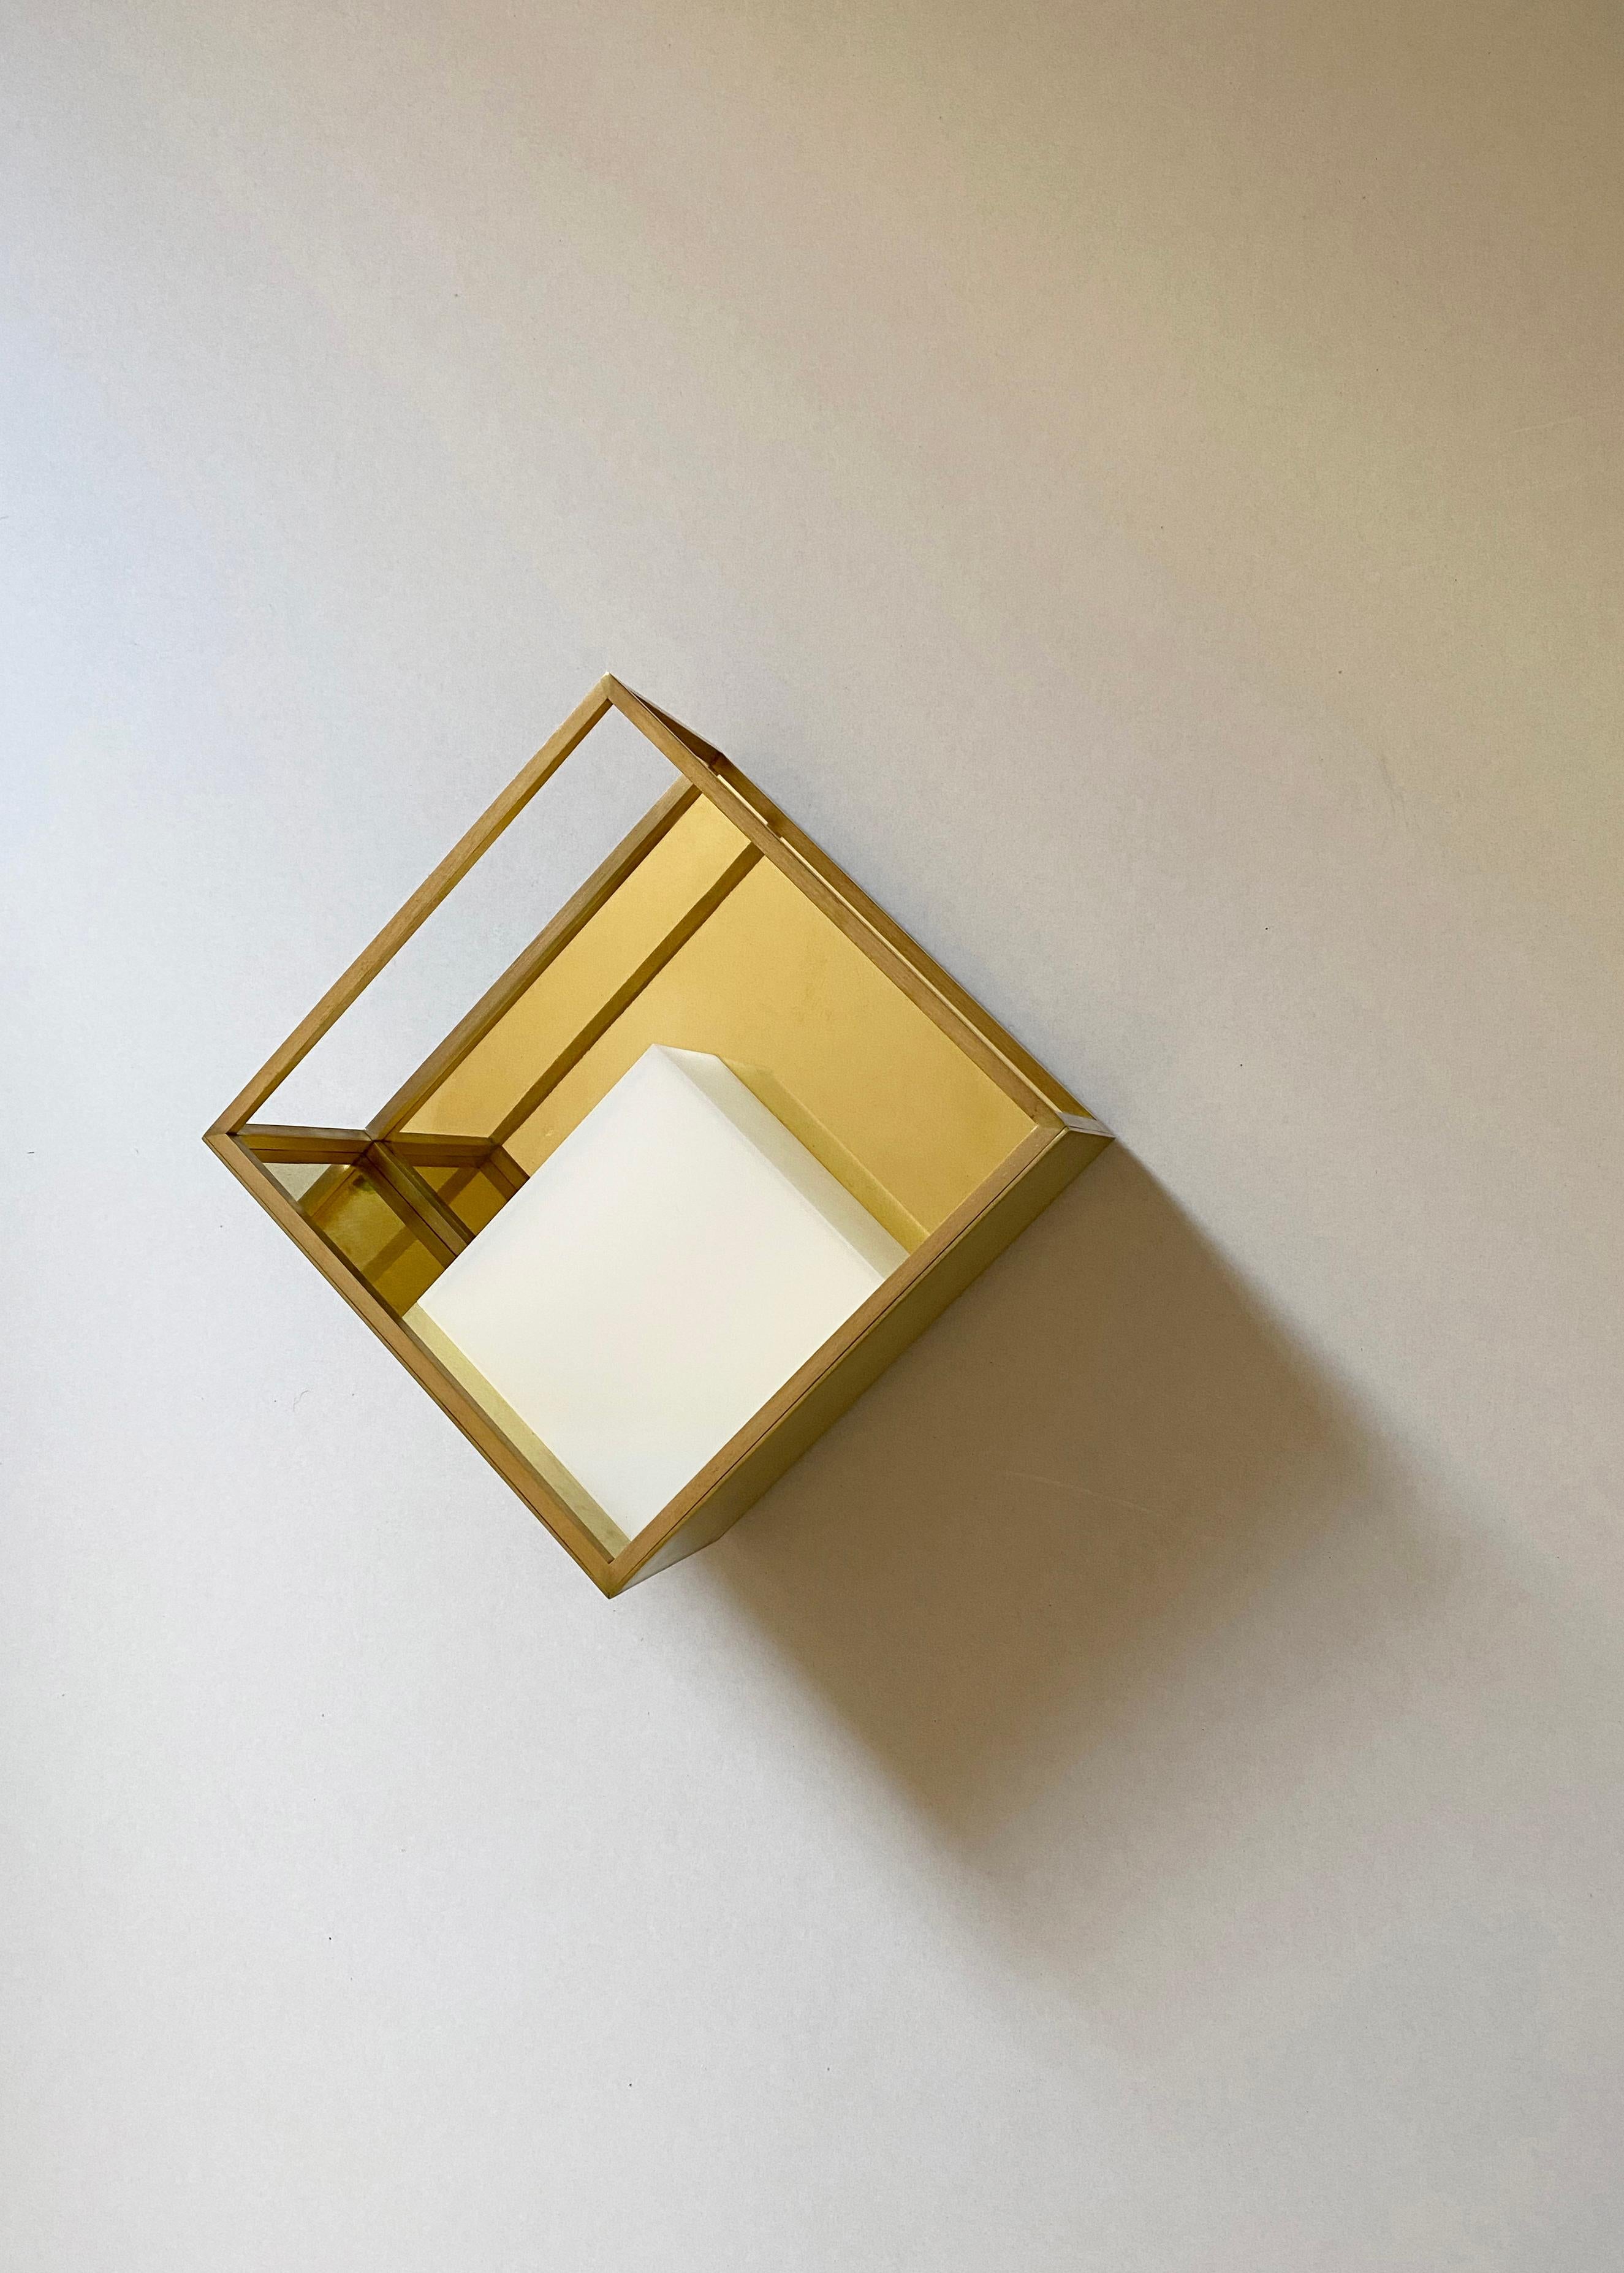 Wiso by Diaphan Studio

Wiso is a wall light that displays the growth patterns of natural crystals in their multiple scales. The outer brass frame encases some polished surfaces that, under daylight, reflect in a warm tone the colors of the